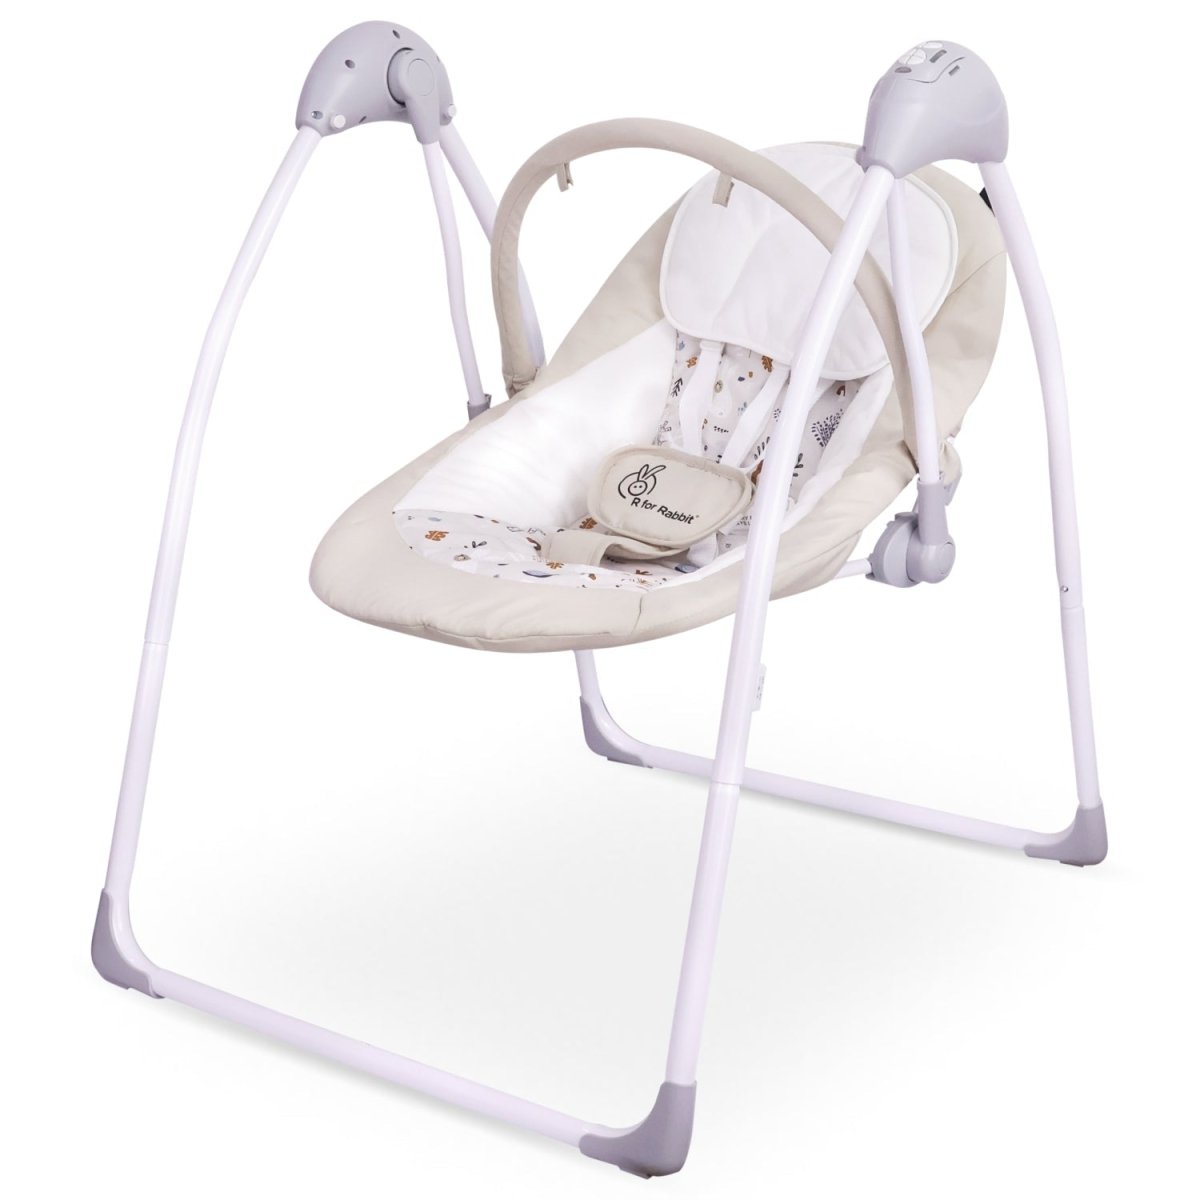 R for Rabbit Snicker Automatic Baby Swing- Beige - SWSNBE02